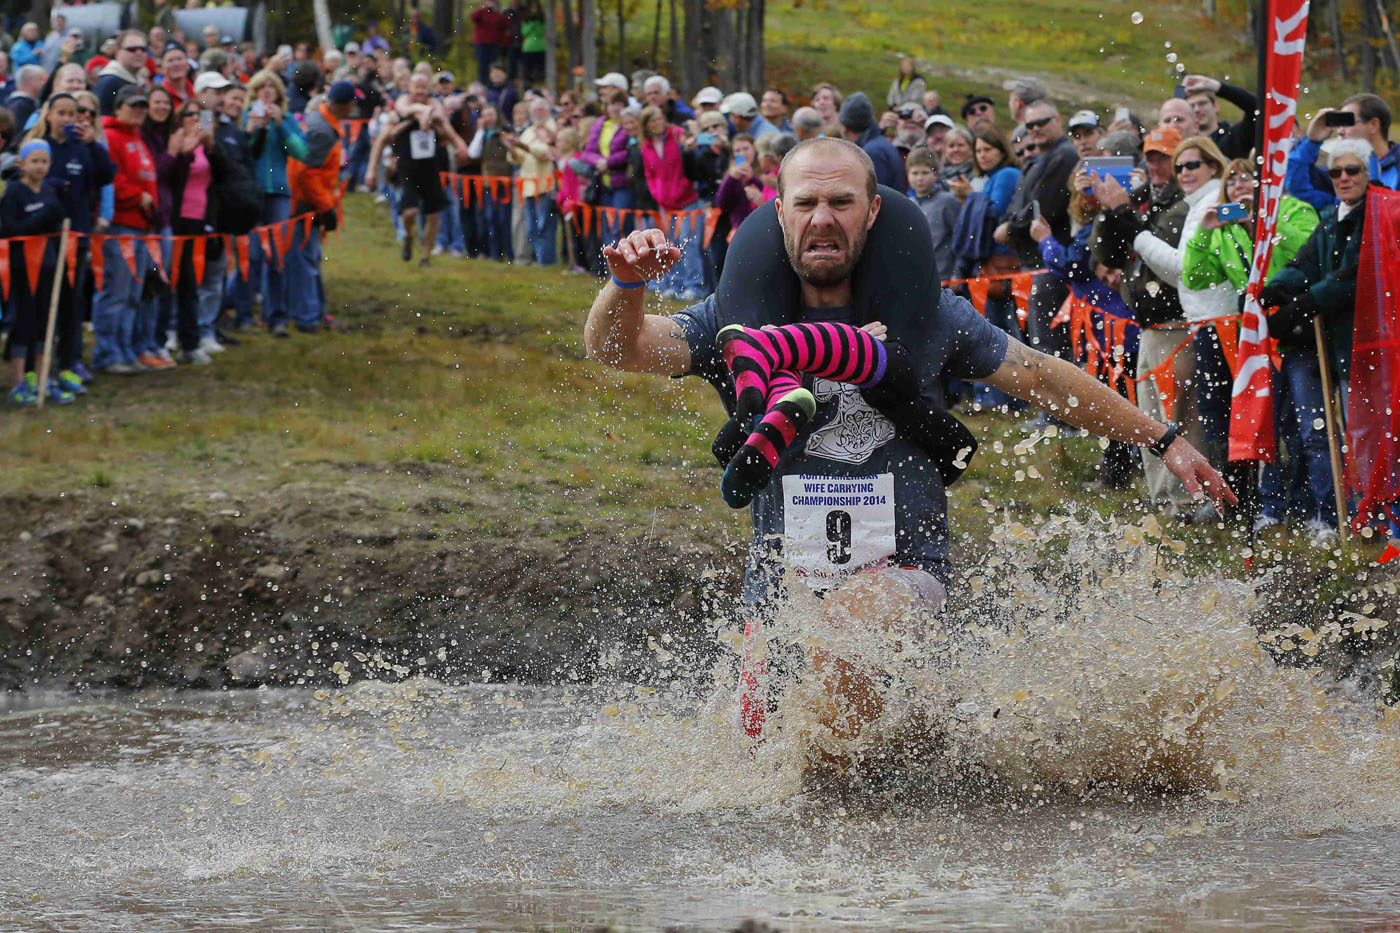 Eventual winner Jesse Wall carries Christina Arsenault through the water pit while competing in the North American Wife Carrying Championship.